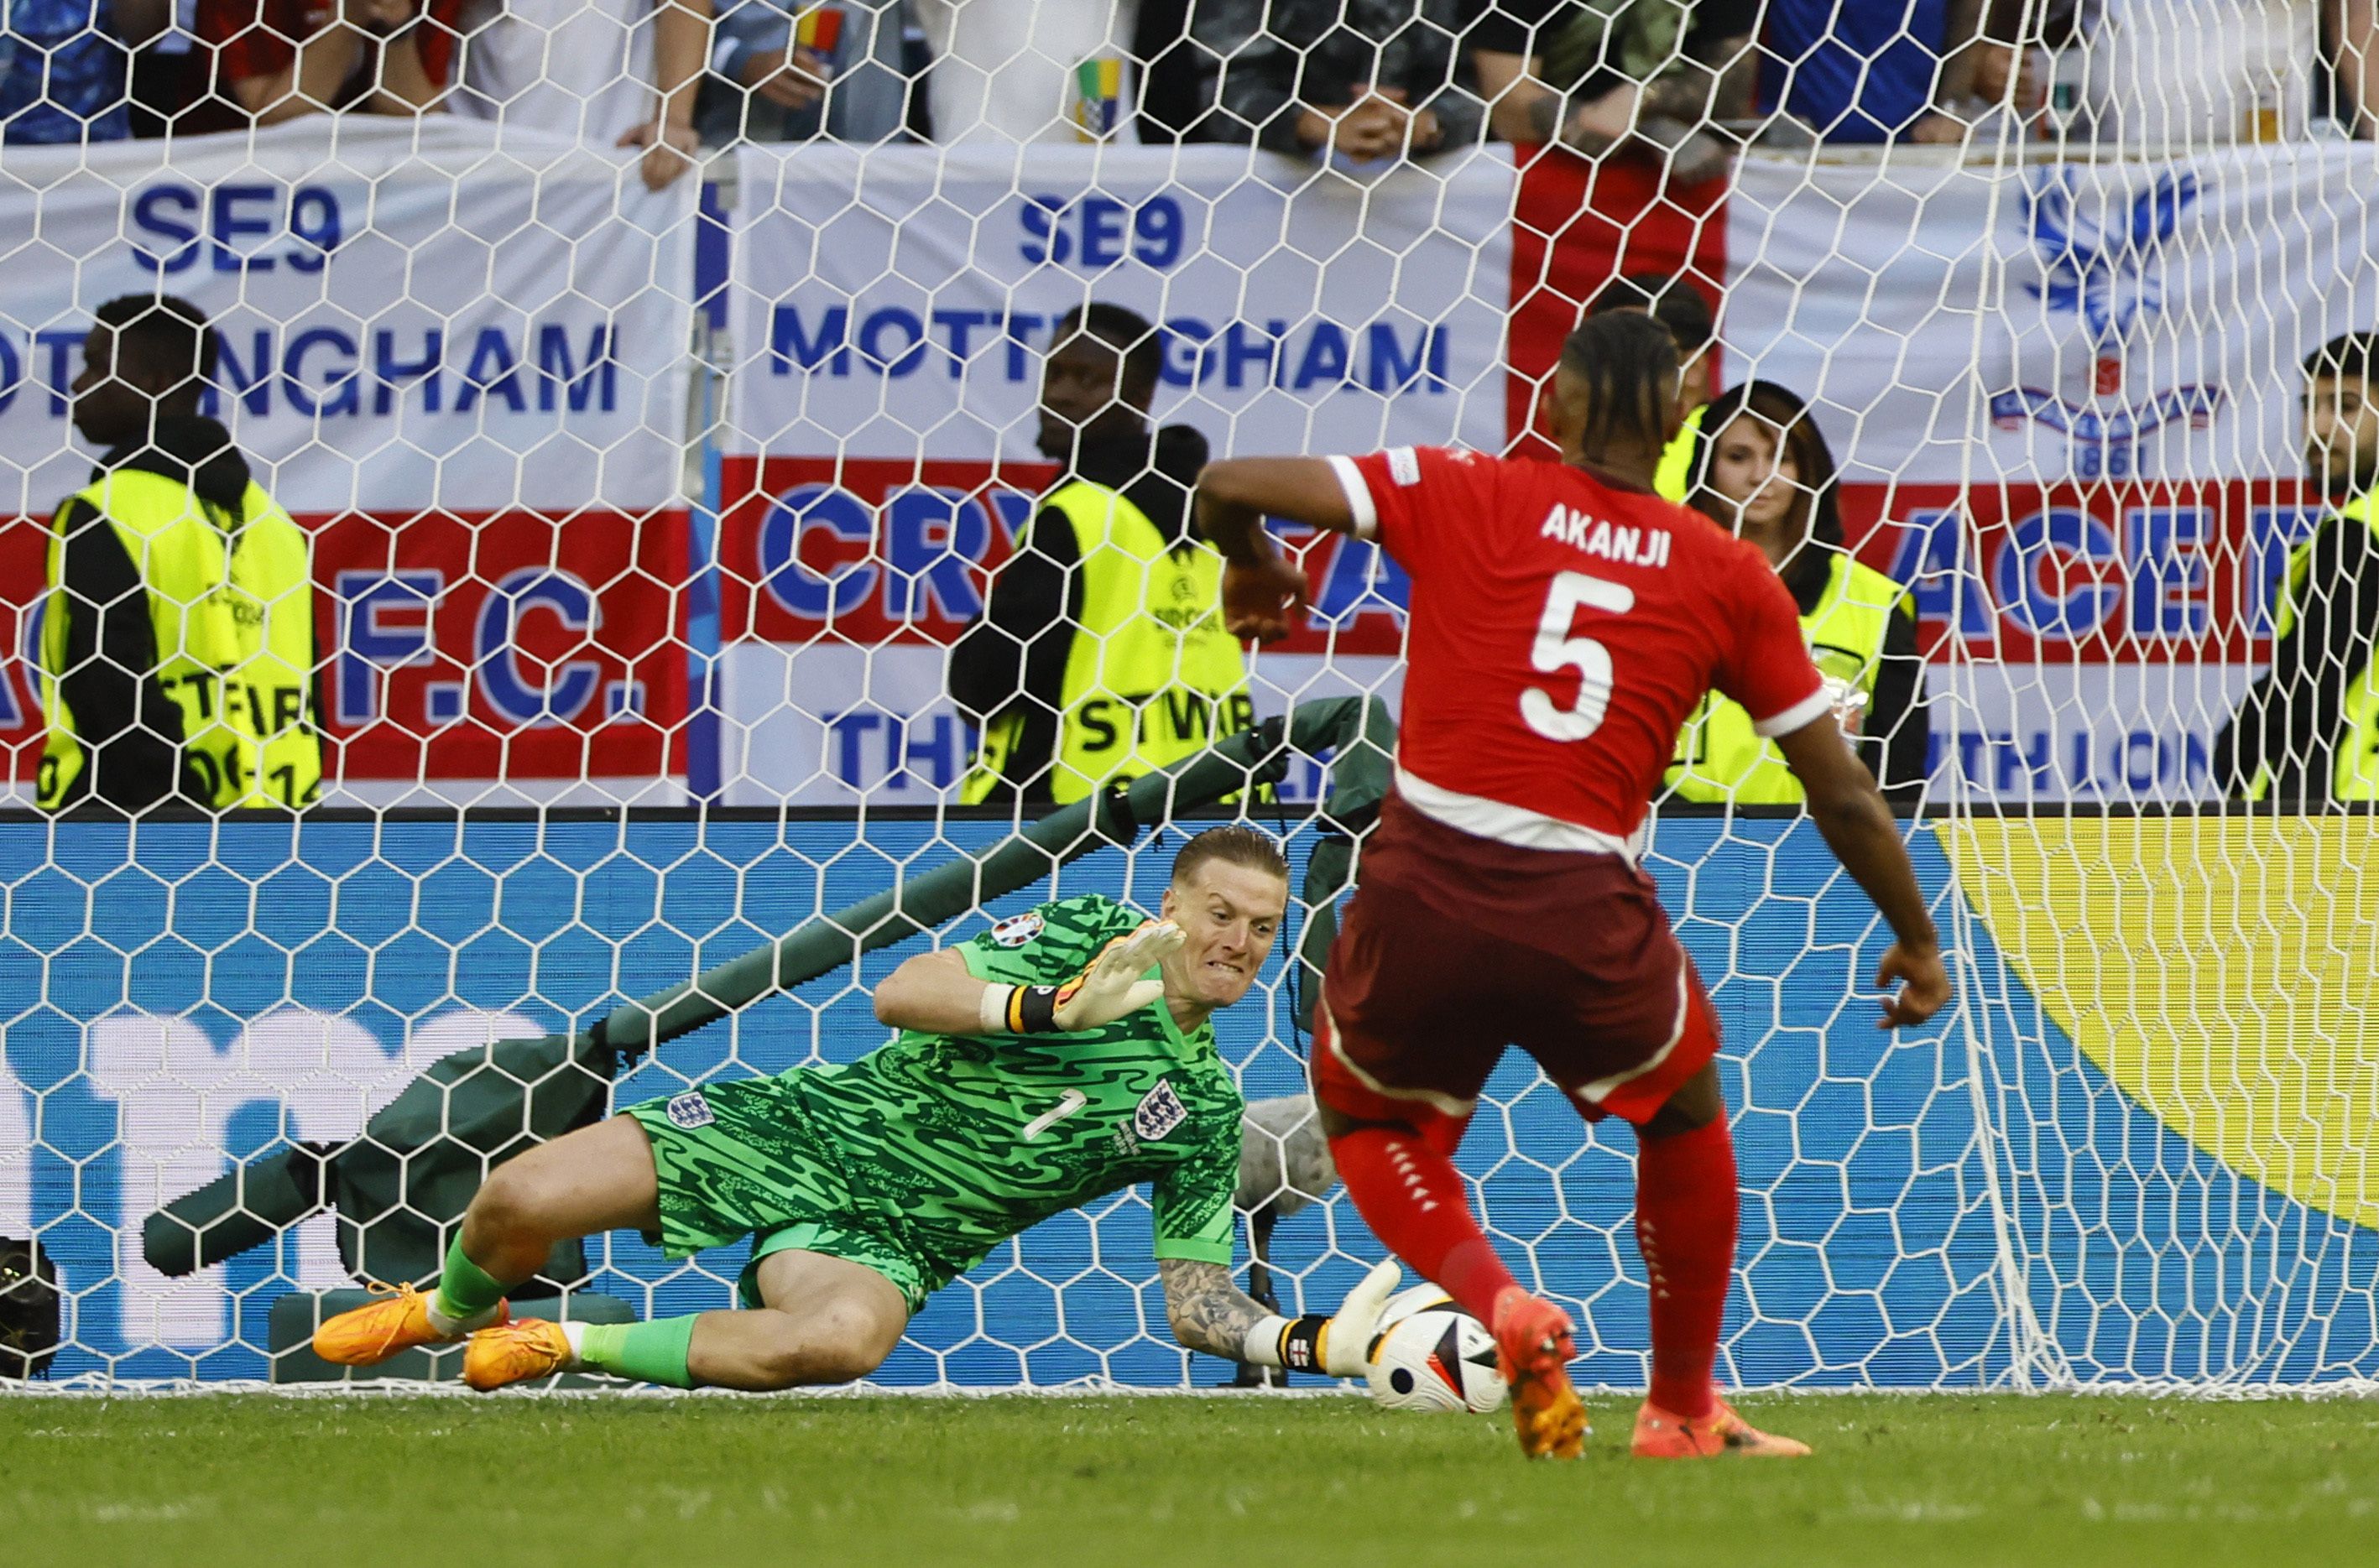 Soccer Football - Euro 2024 - Quarter Final - England v Switzerland - Dusseldorf Arena, Dusseldorf, Germany - July 6, 2024 England's Jordan Pickford saves a penalty in the shootout missed by Switzerland's Manuel Akanji REUTERS/Wolfgang Rattay